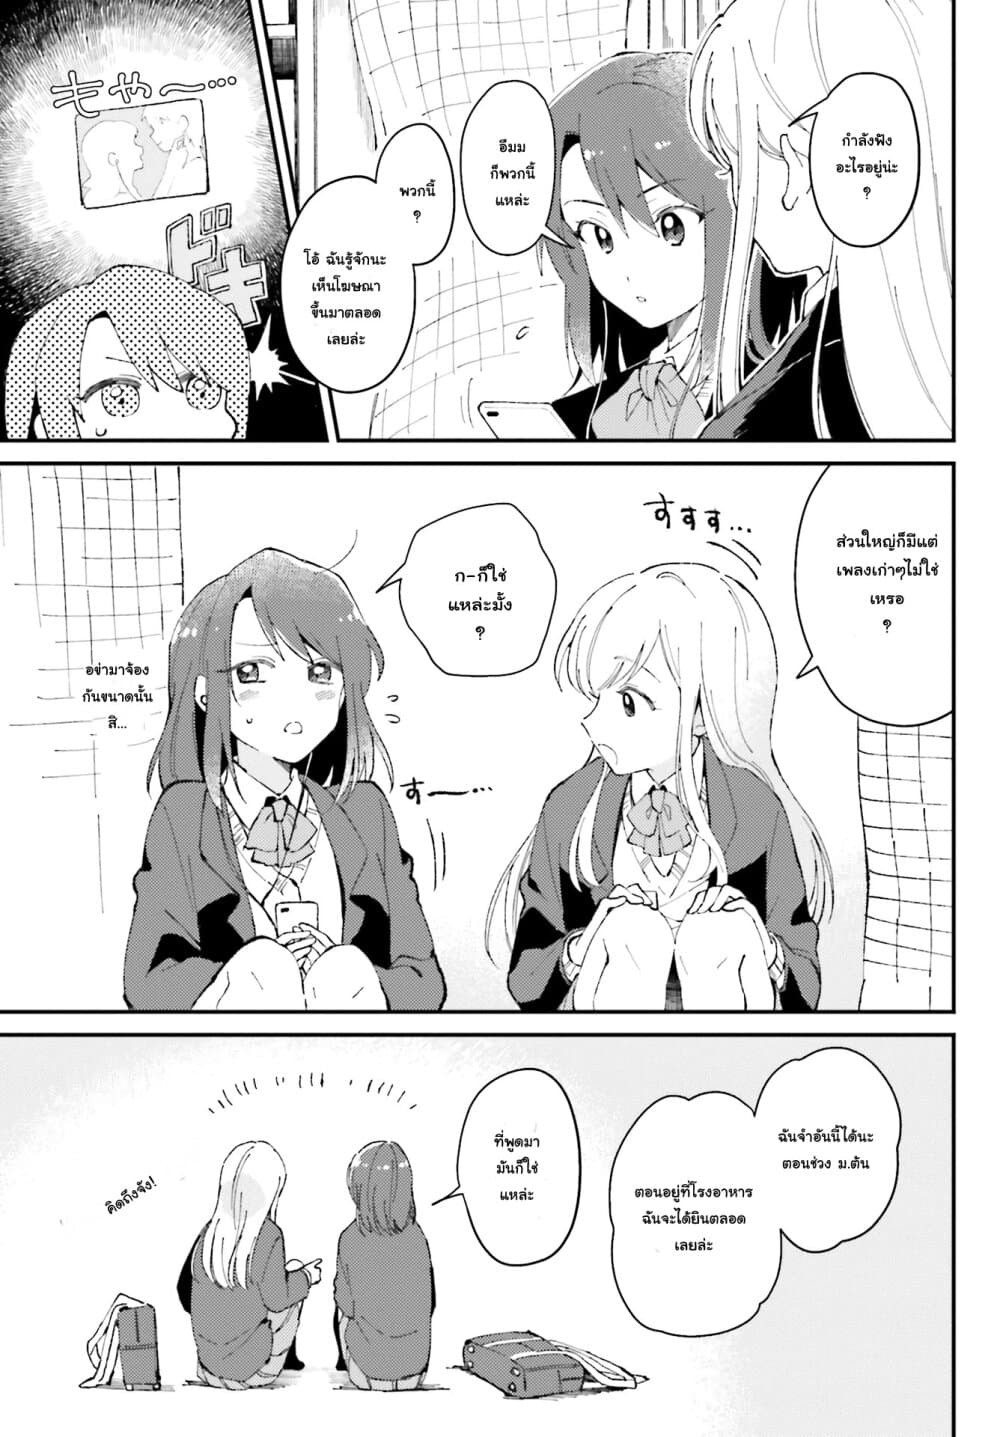 Adachi-to-Shimamura-Official-Comic-Anthology-Chapter2-3.jpg